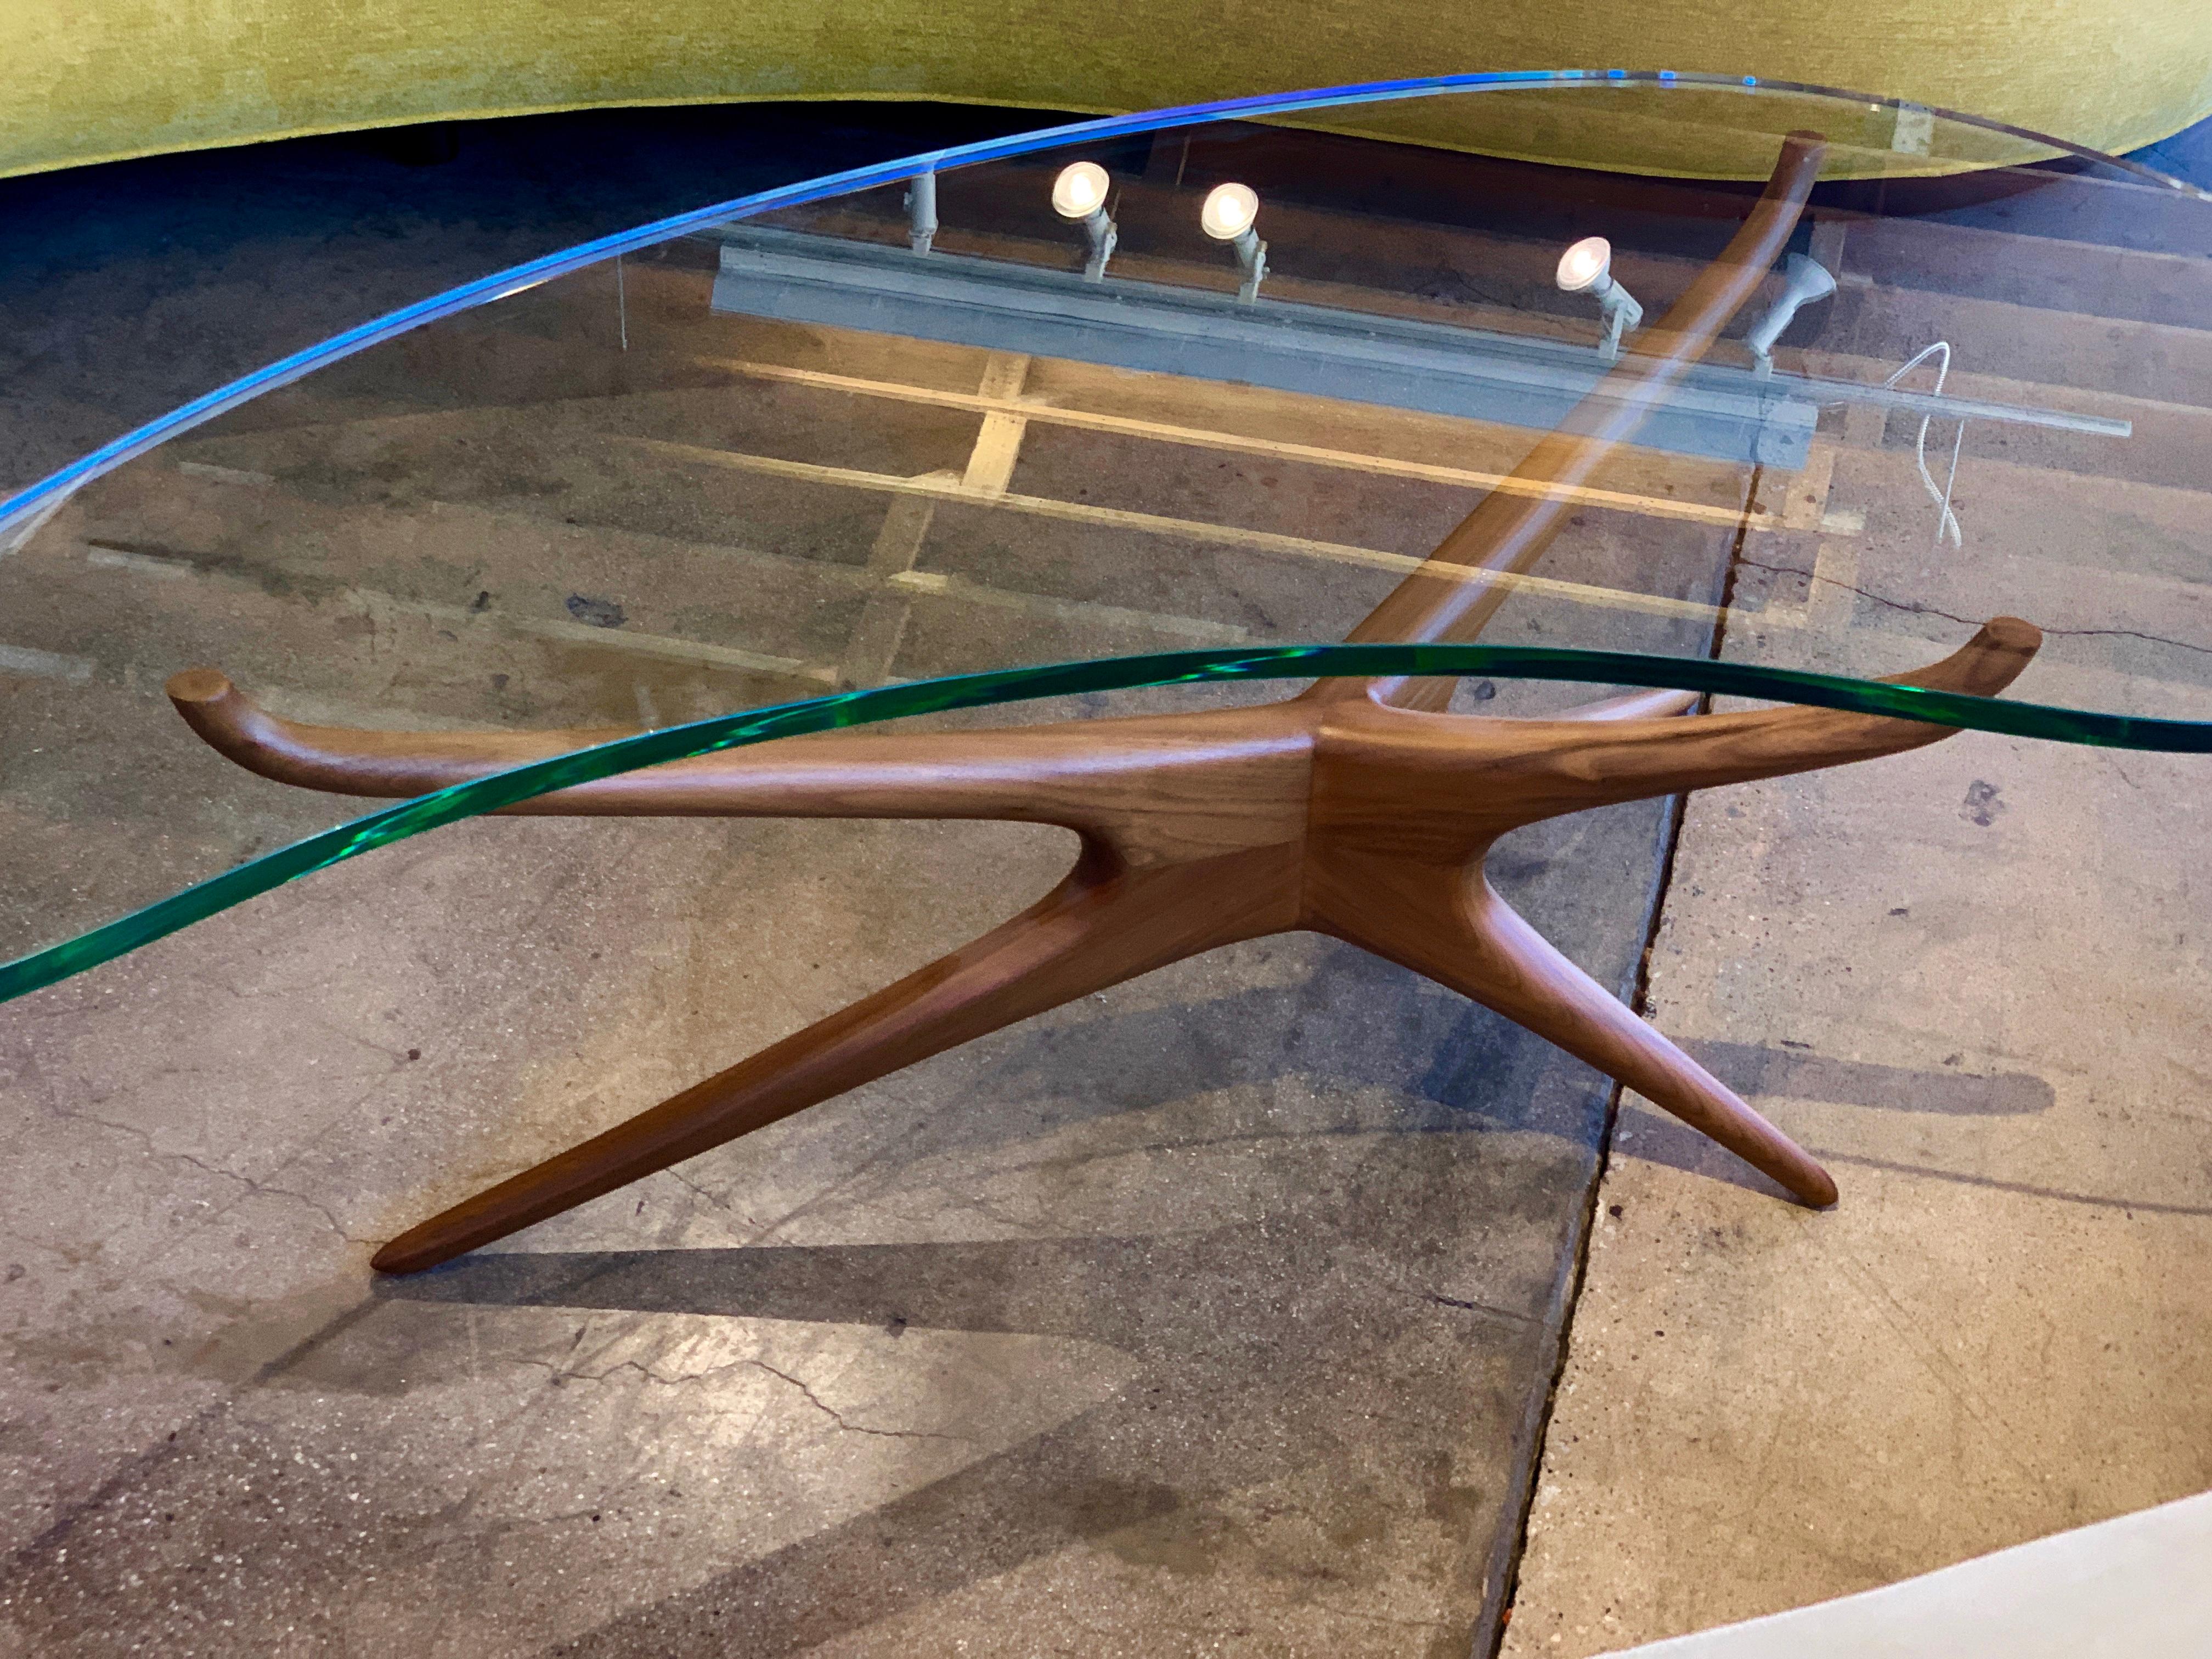 A nice newer bi-morphic glass top coffee table designed by Vladimir Kagan. This table was purchased from Holly Hunt. It is a few years old and is in very good condition with only some minor marks to the glass and wood base.